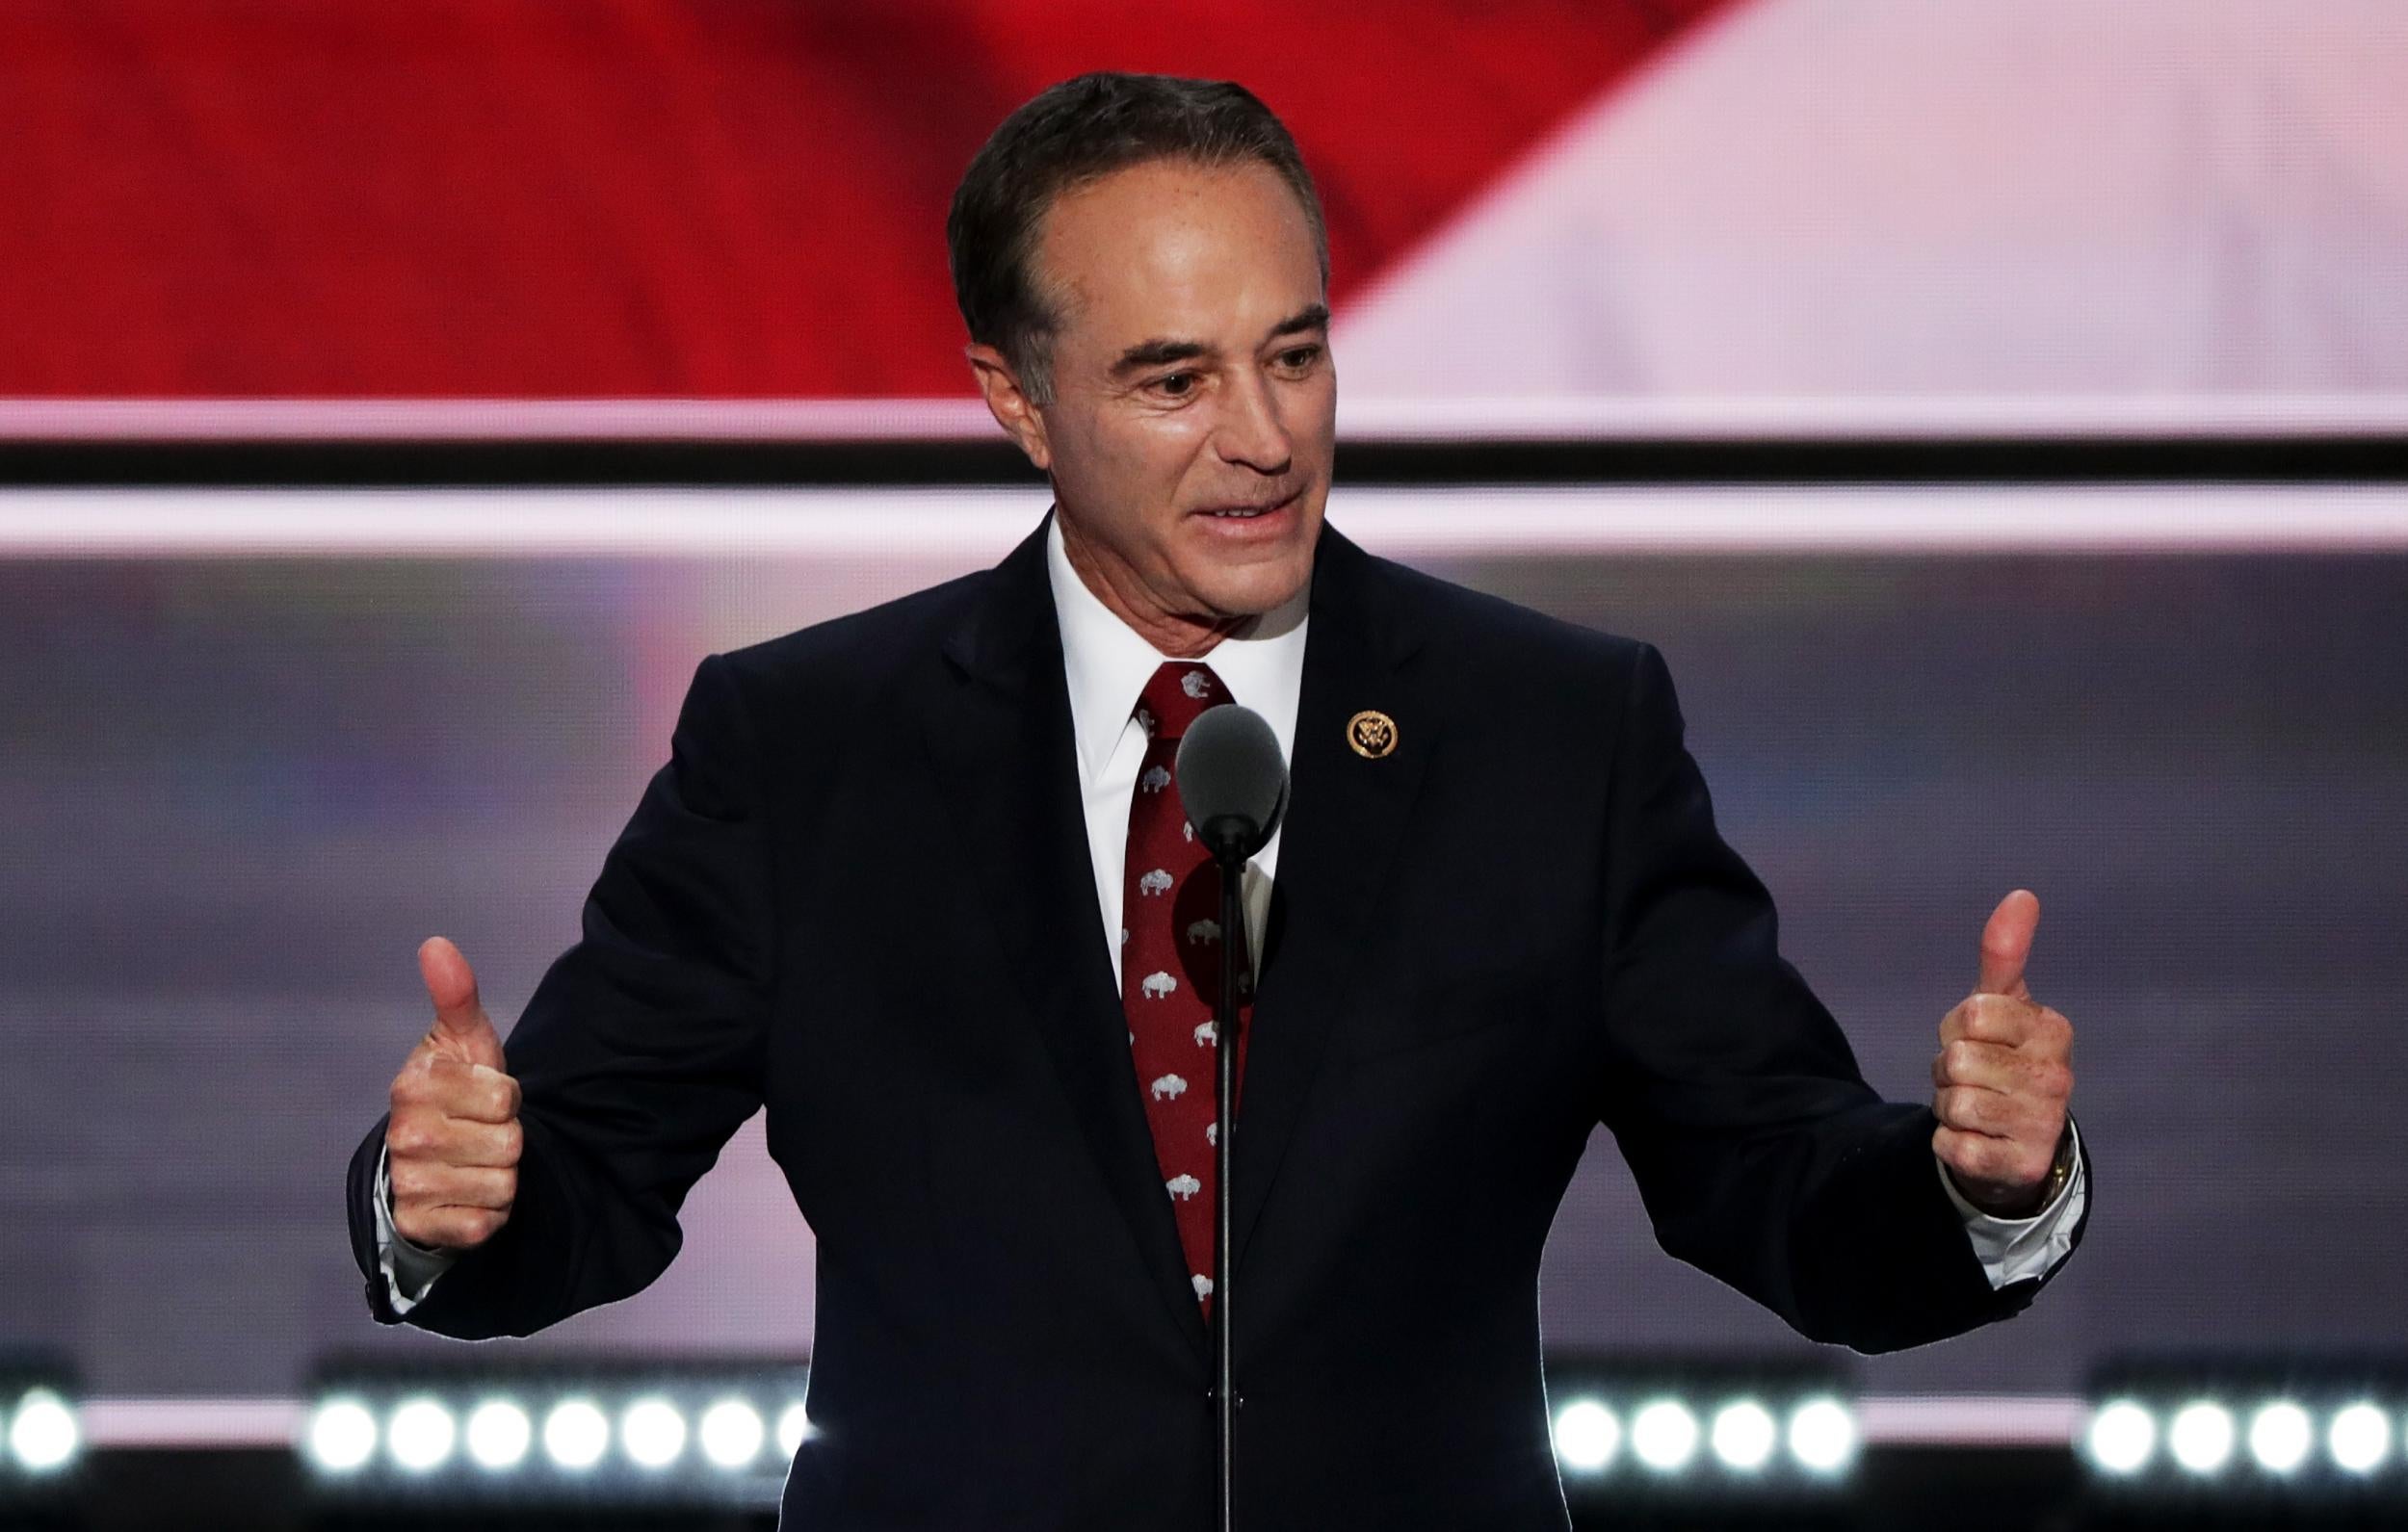 Representative Chris Collins delivers a speech on the second day of the Republican National Convention